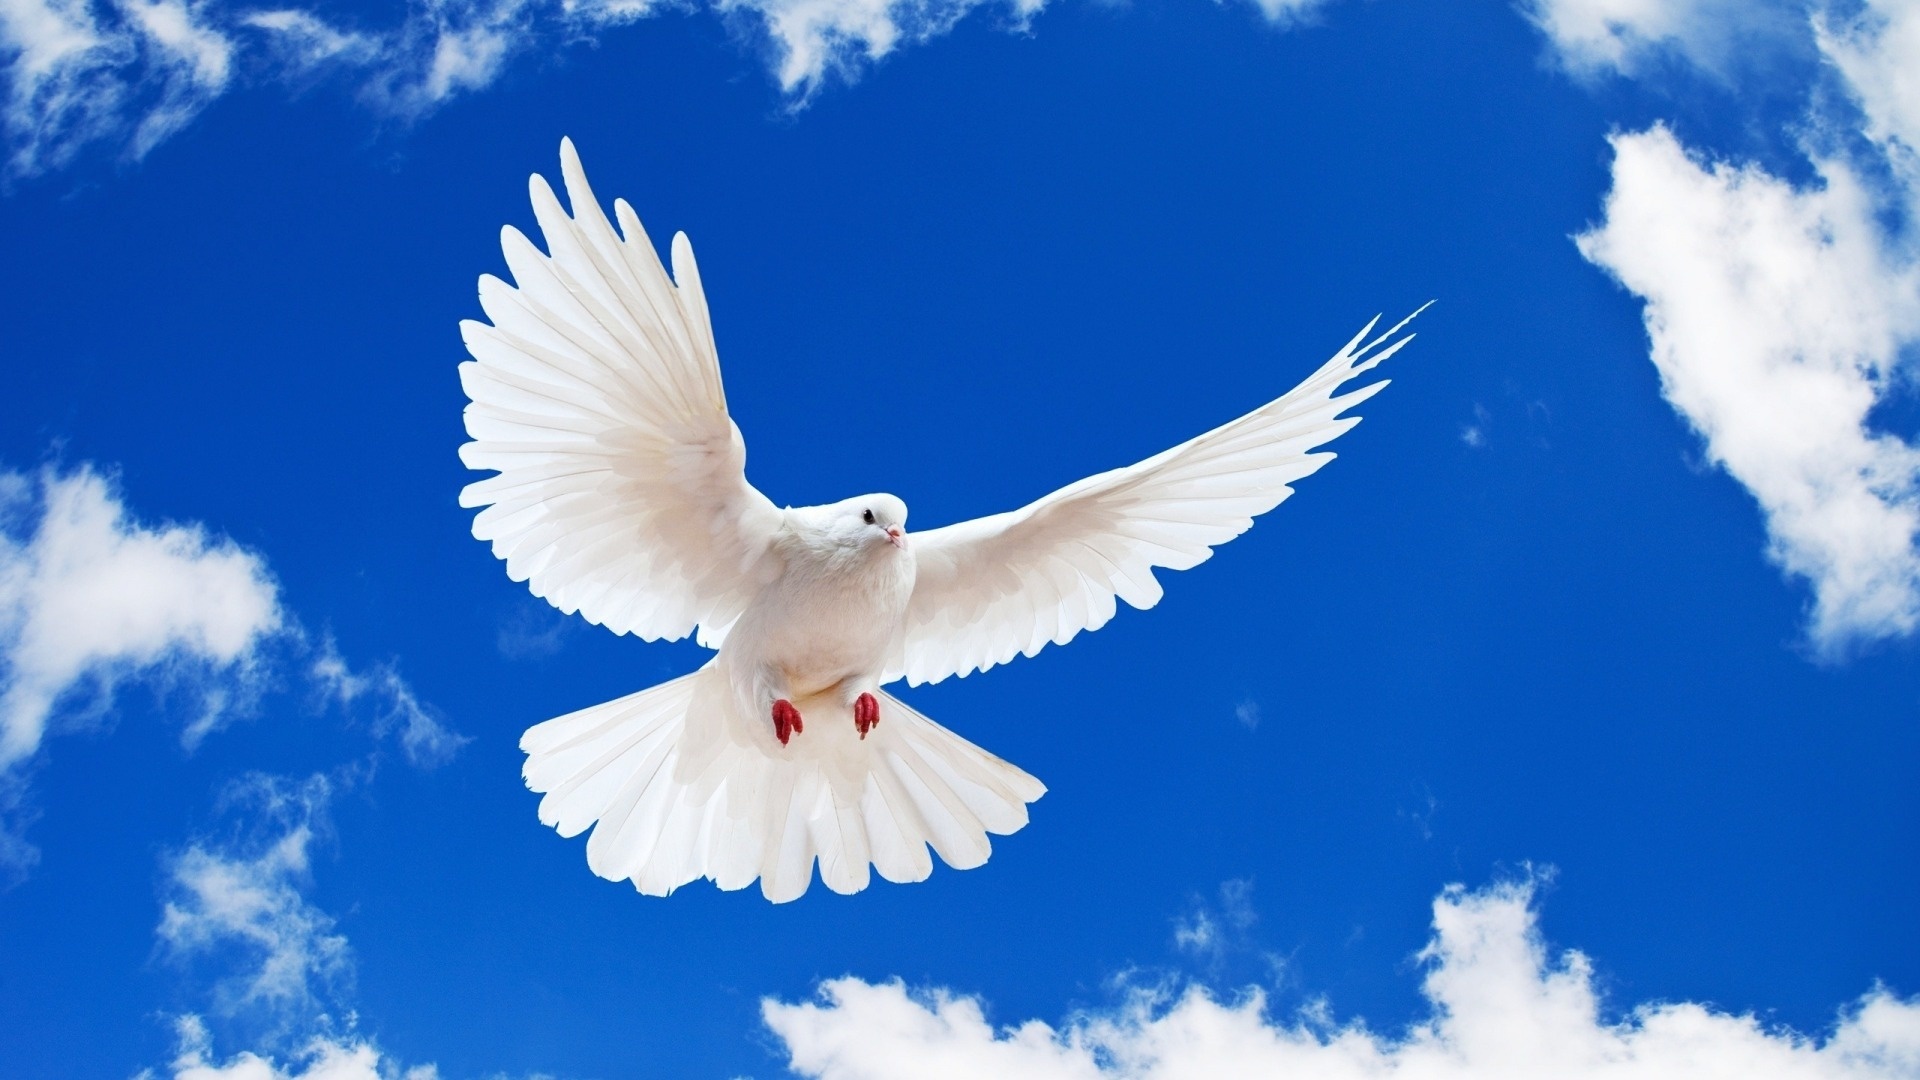 Dove Wallpaper Background And You Like This White Bird